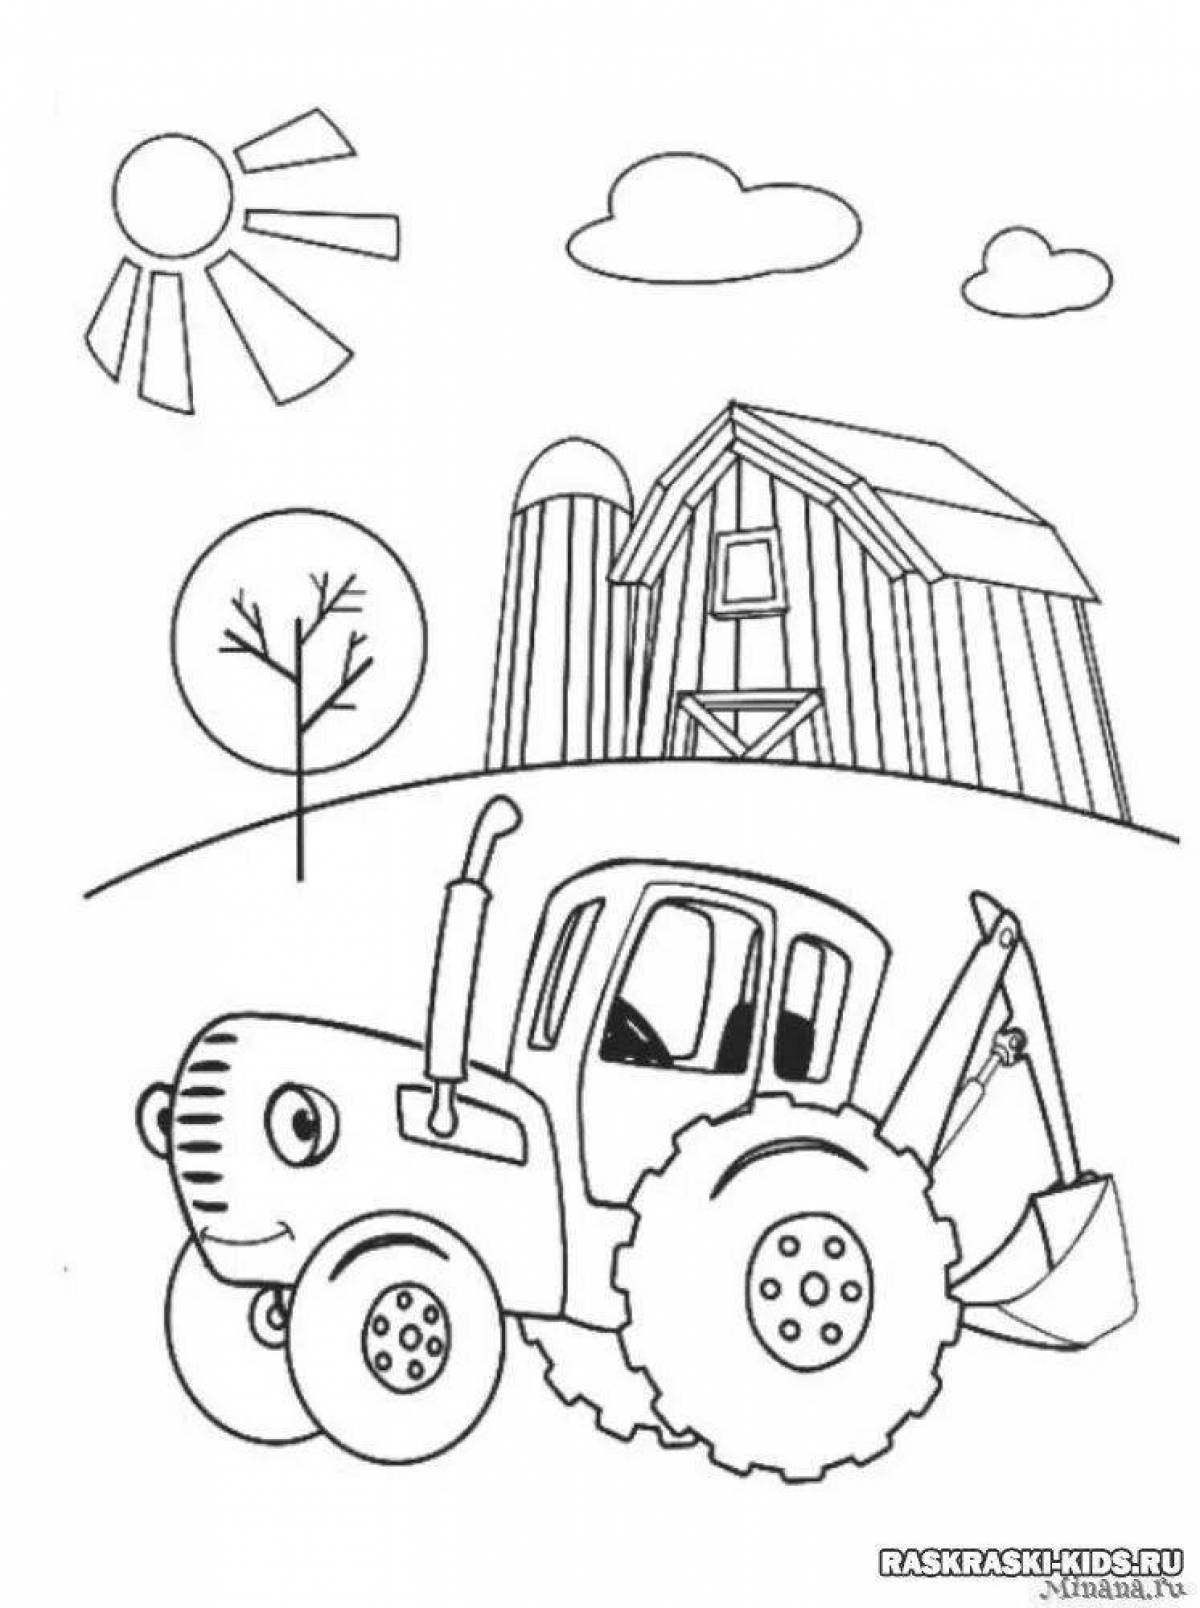 Coloring page of a striking blue tractor